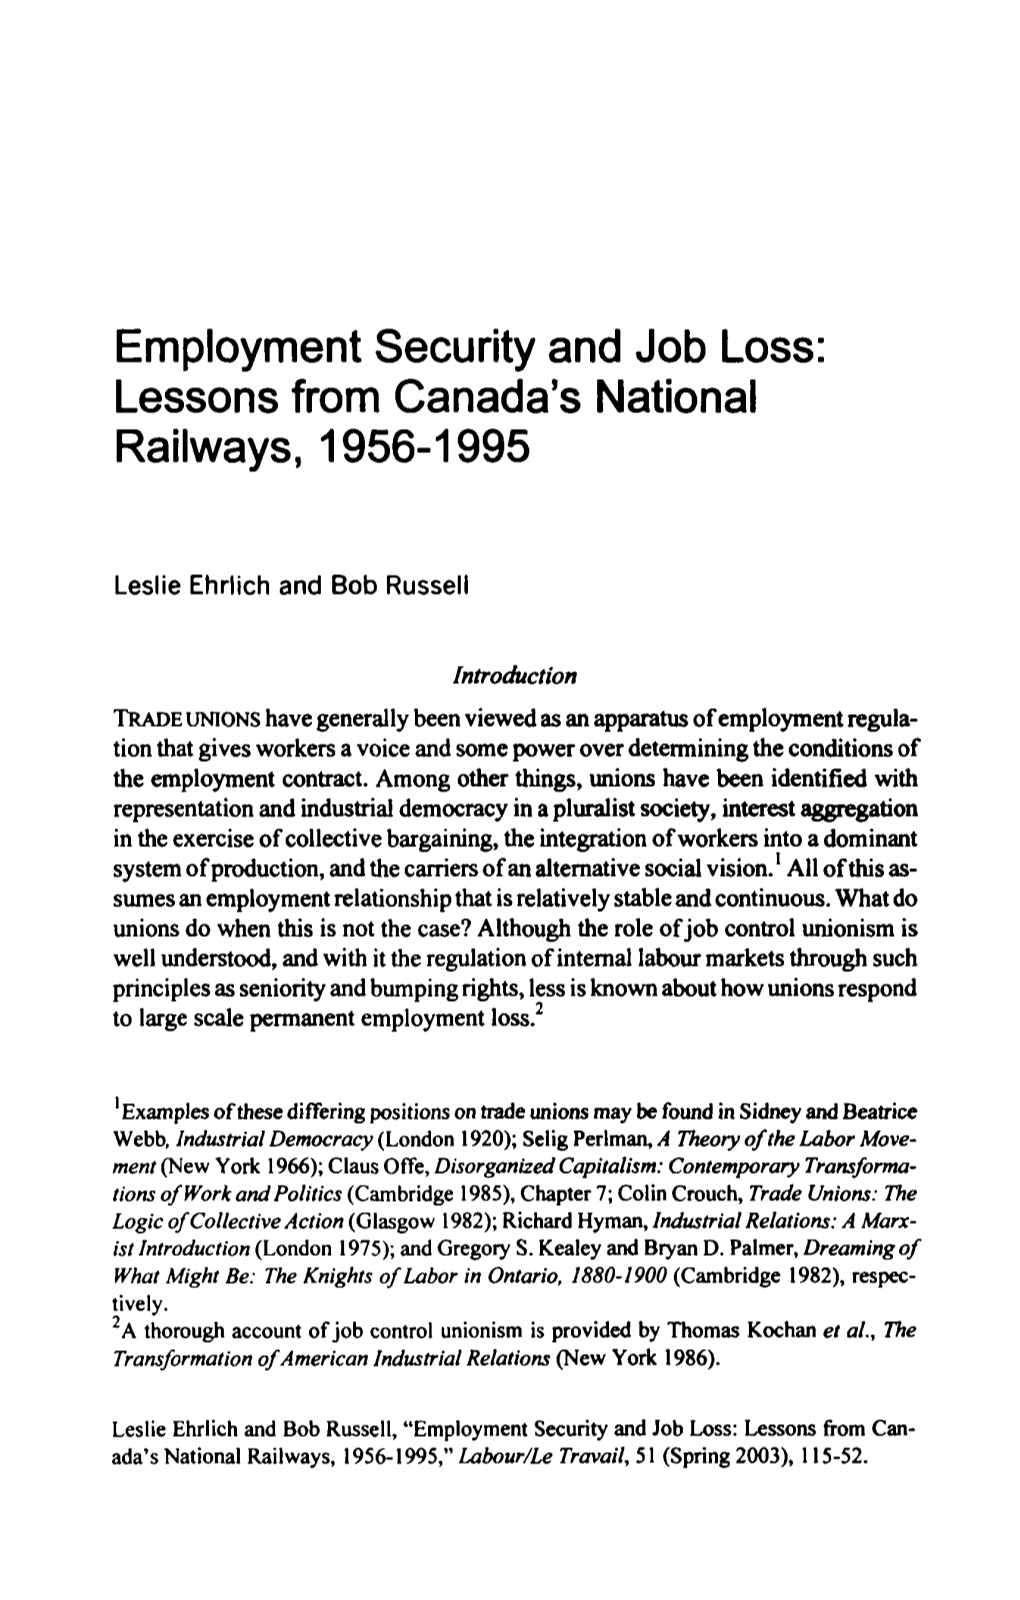 Employment Security and Job Loss: Lessons from Canada's National Railways, 1956-1995